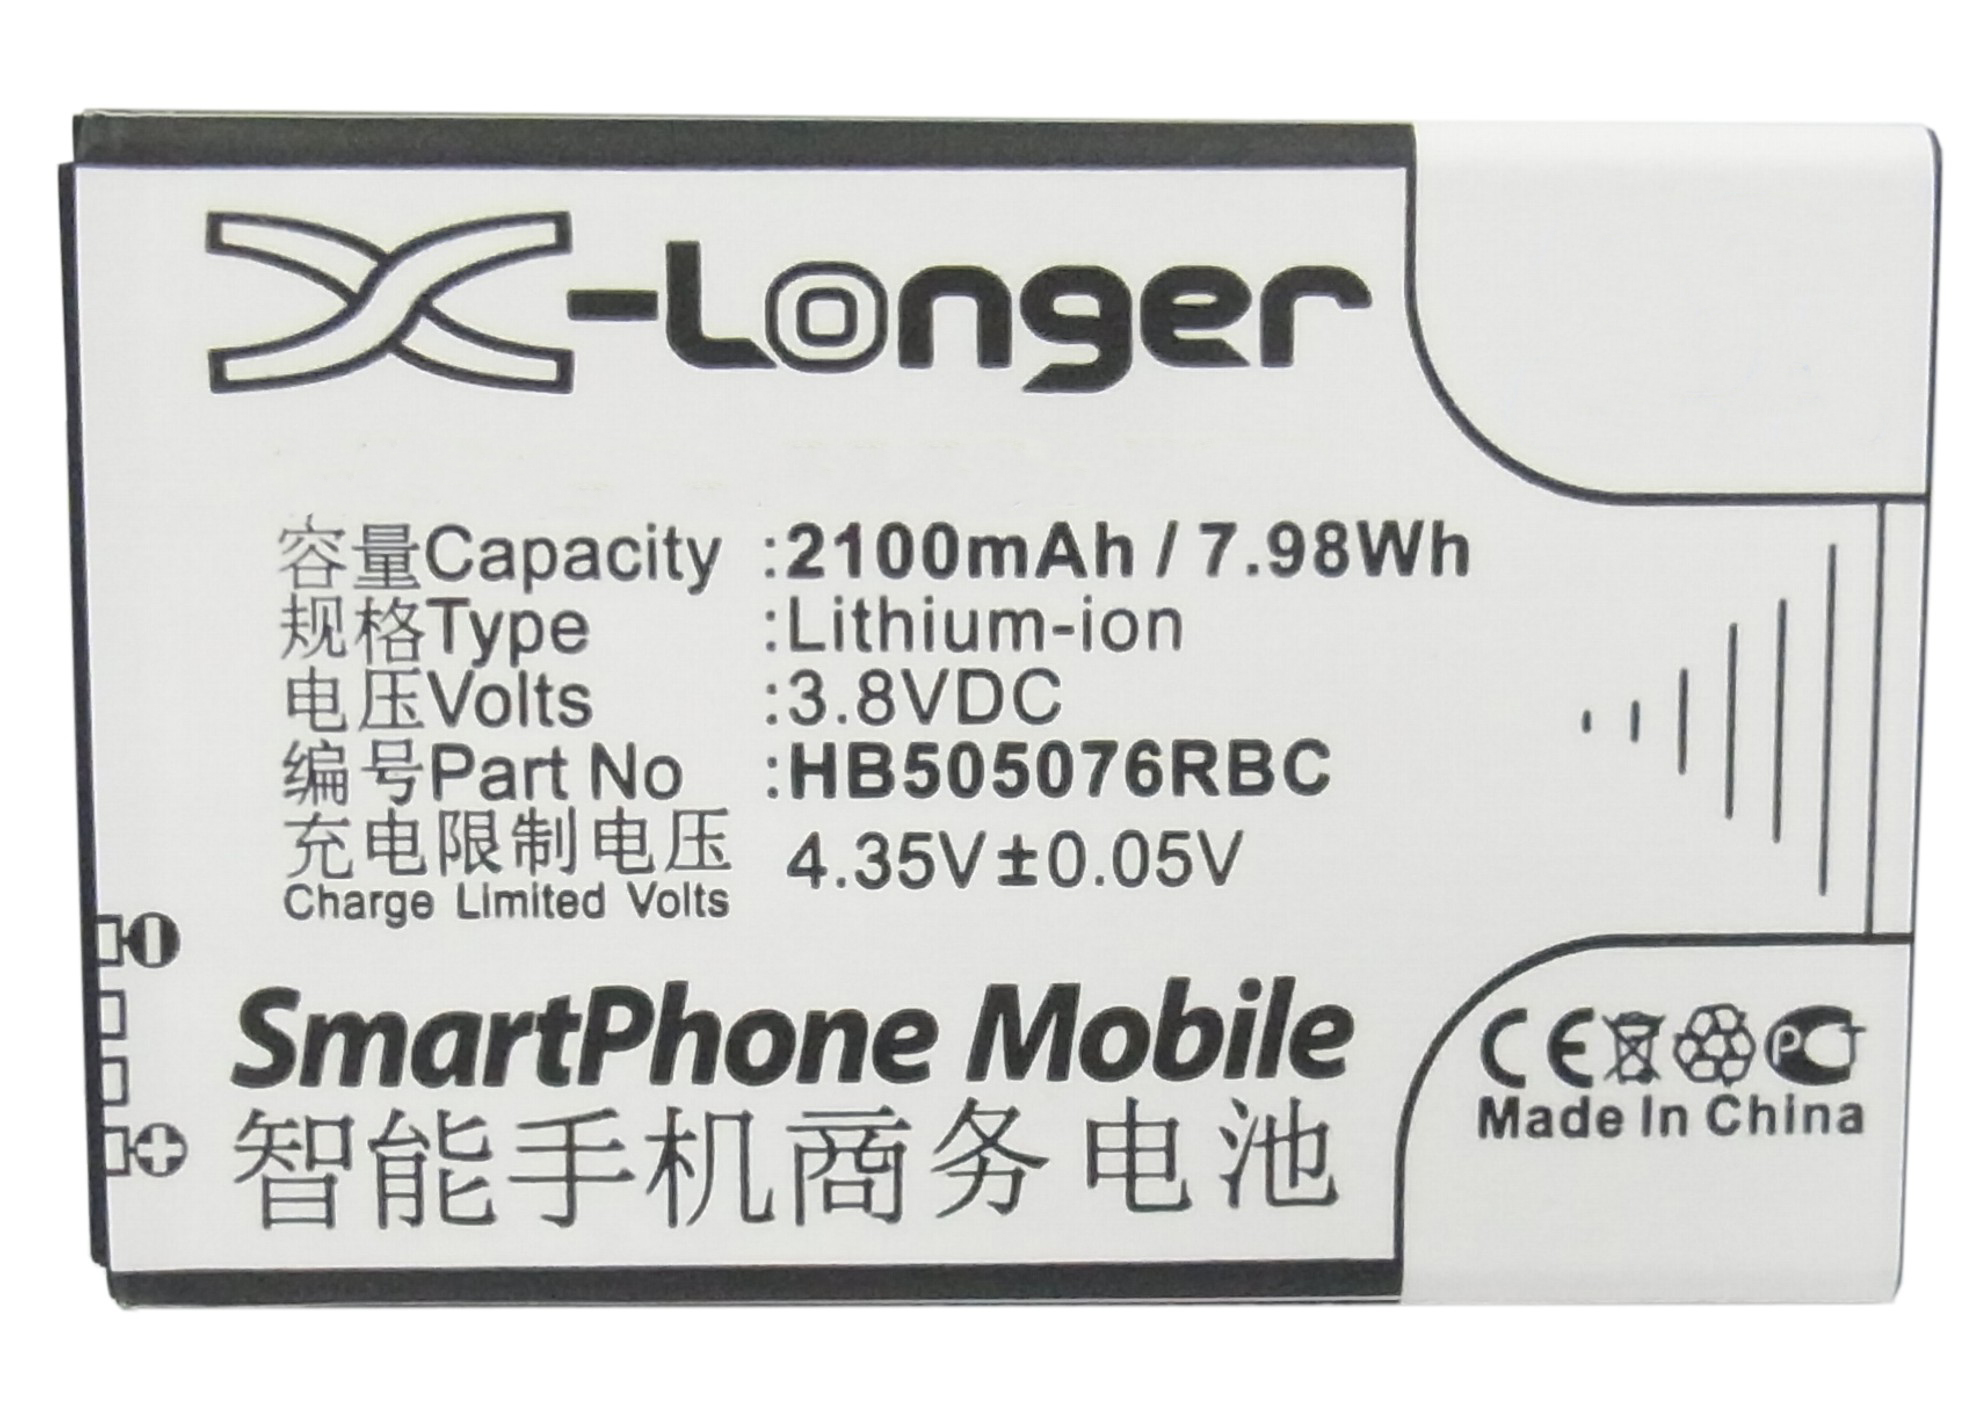 Synergy Digital Battery Compatible With Huawei HB505076RBC Cellphone Battery - (Li-Ion, 3.8V, 2100 mAh / 7.98Wh)